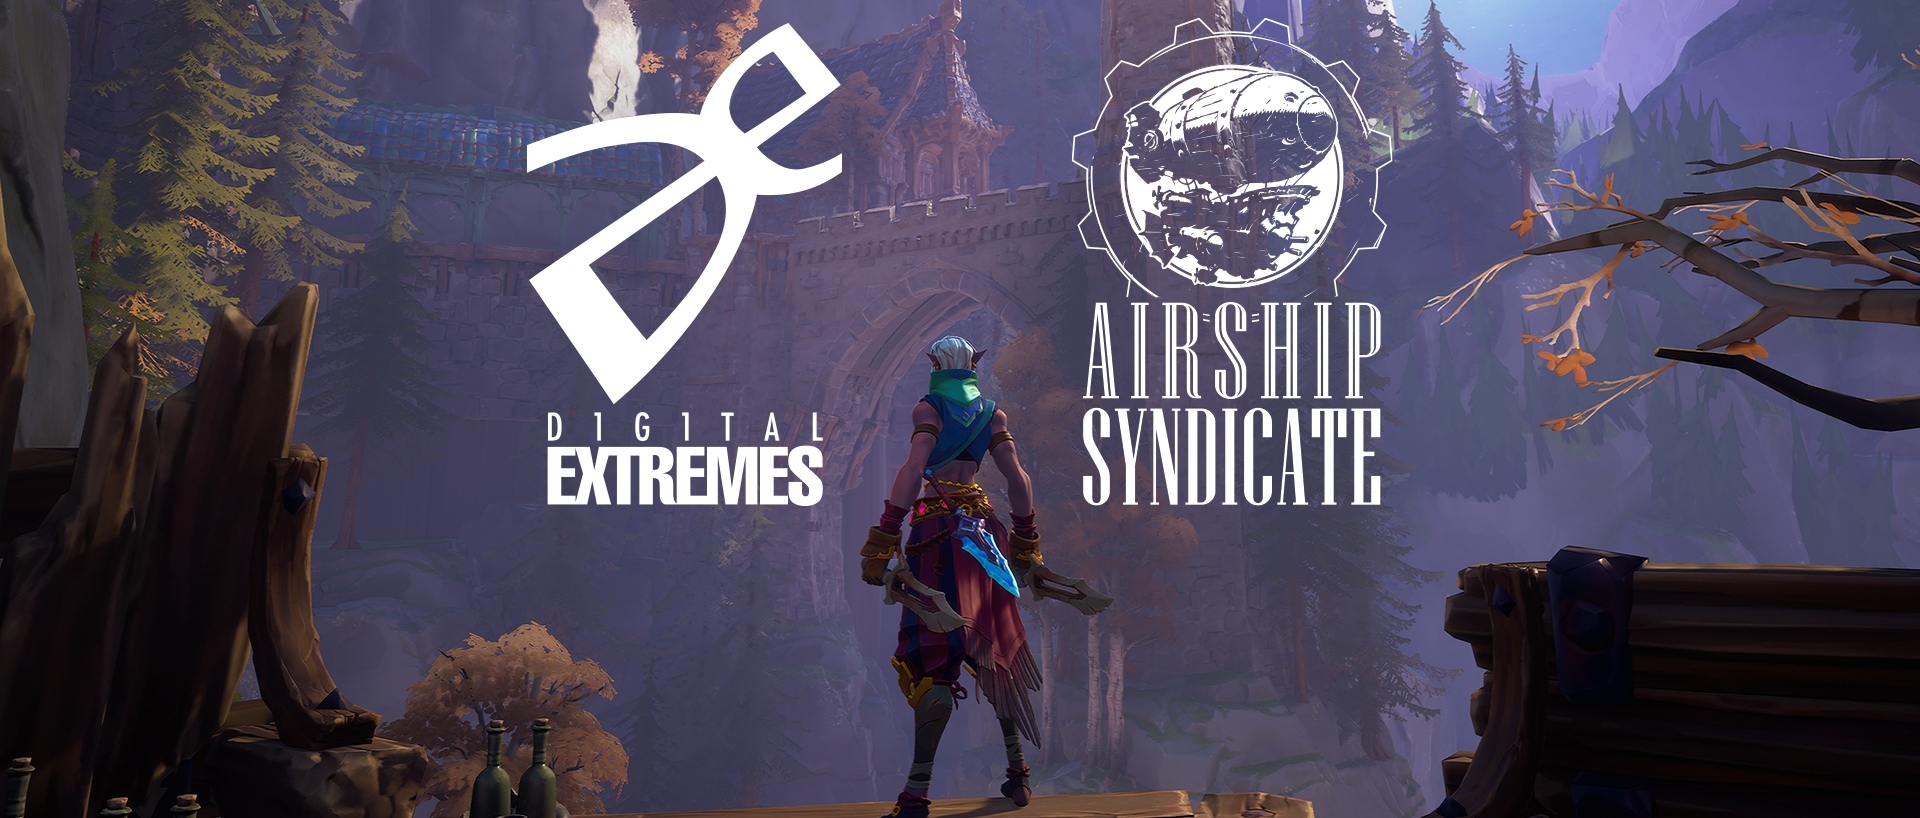 Digitial Extremes and Airship Syndicate announce character-based